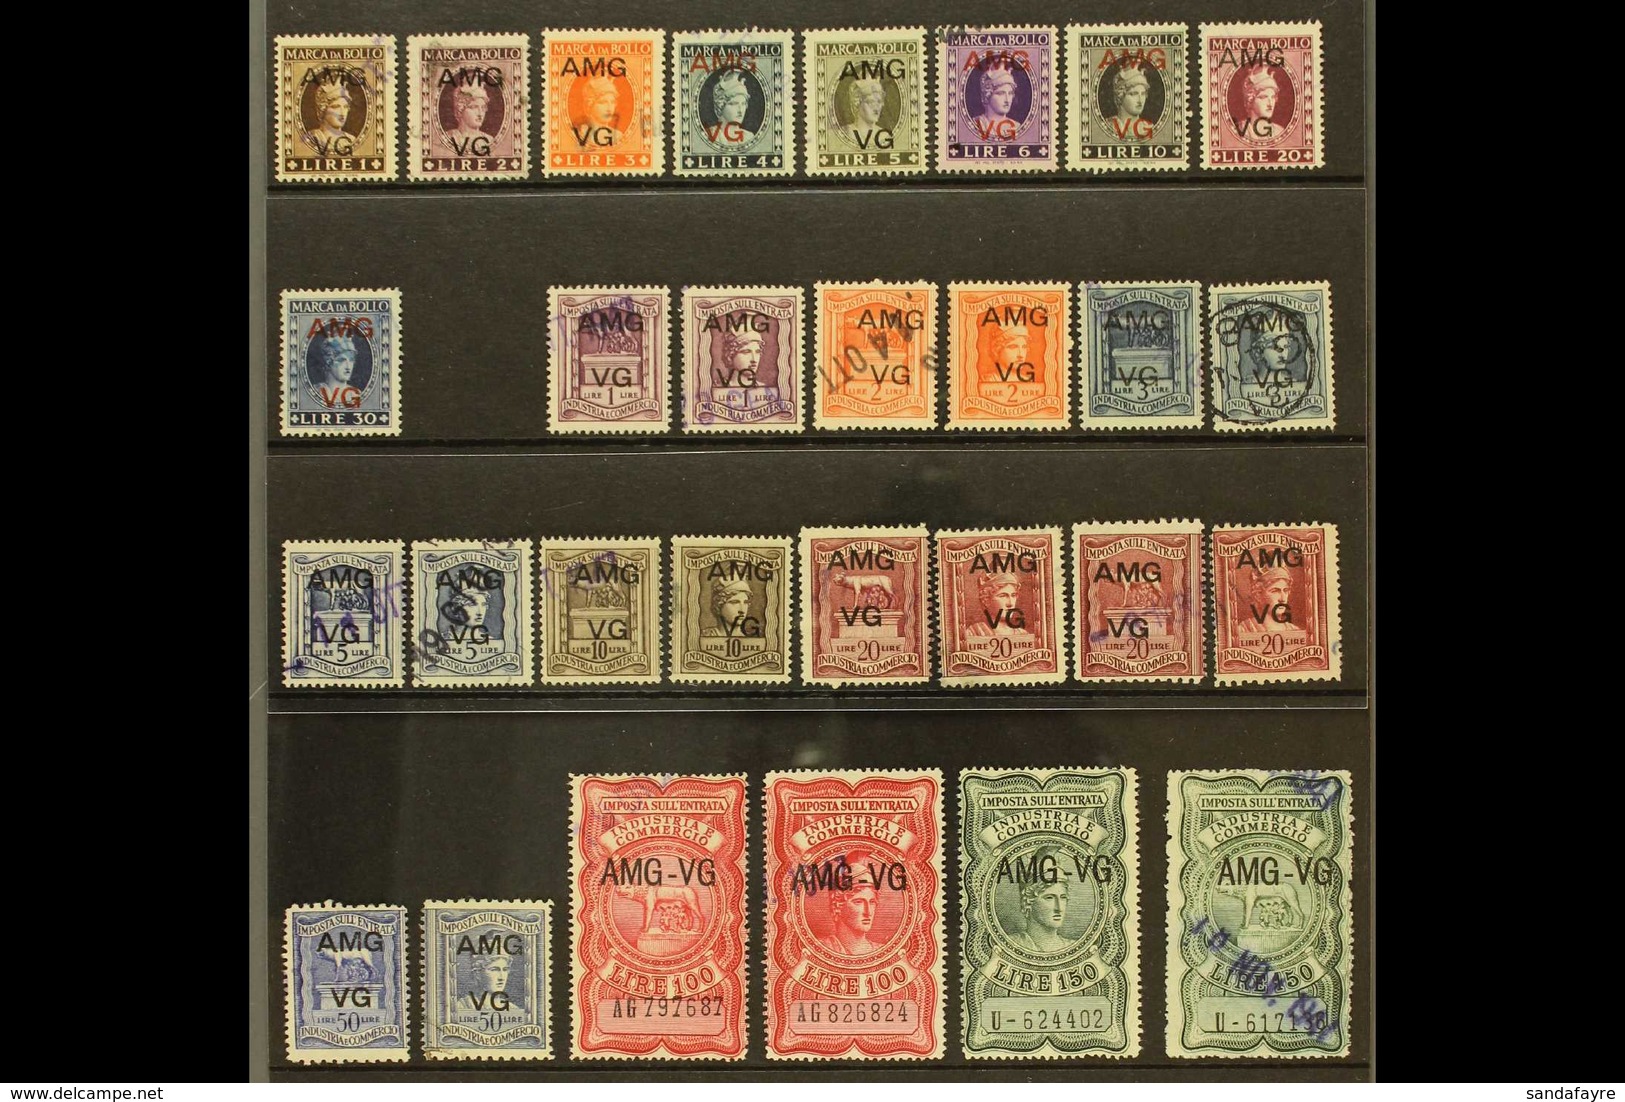 VENEZIA GIULIA REVENUE STAMPS 1940's Fine Used Collection Of Various "AMG / VG" Overprinted Italian Revenues, Inc Marca  - Unclassified